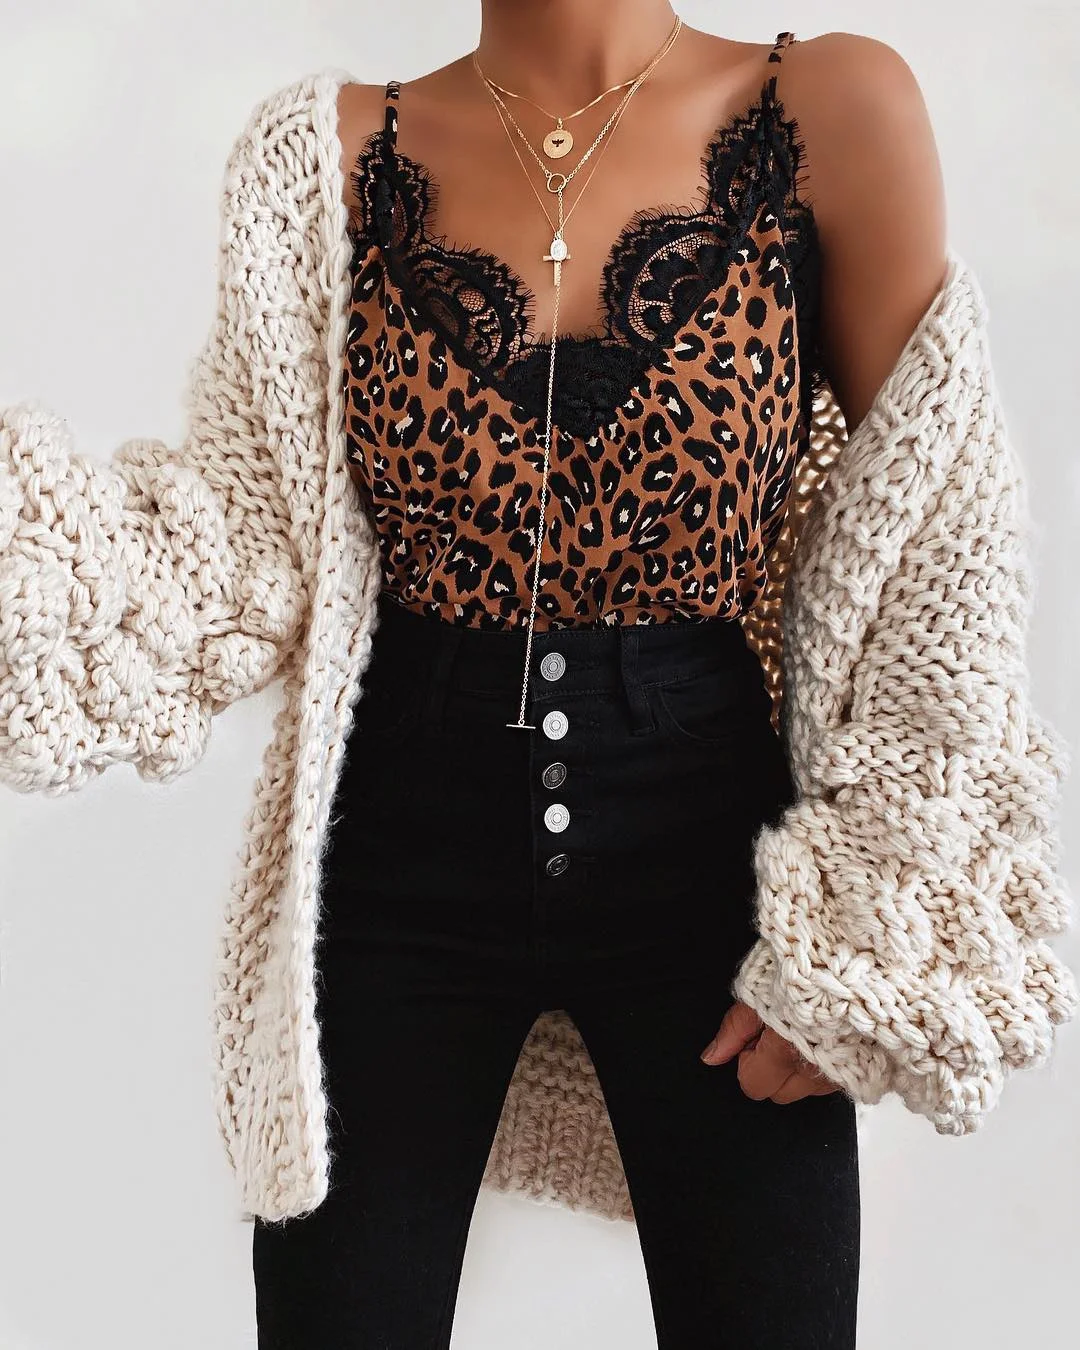 Graduation Gifts  Women Summer Lace Leopard Snake Print Camis Top Ladies Strappy Loose V Neck Vest Tank Top Female Clothing Clubwear